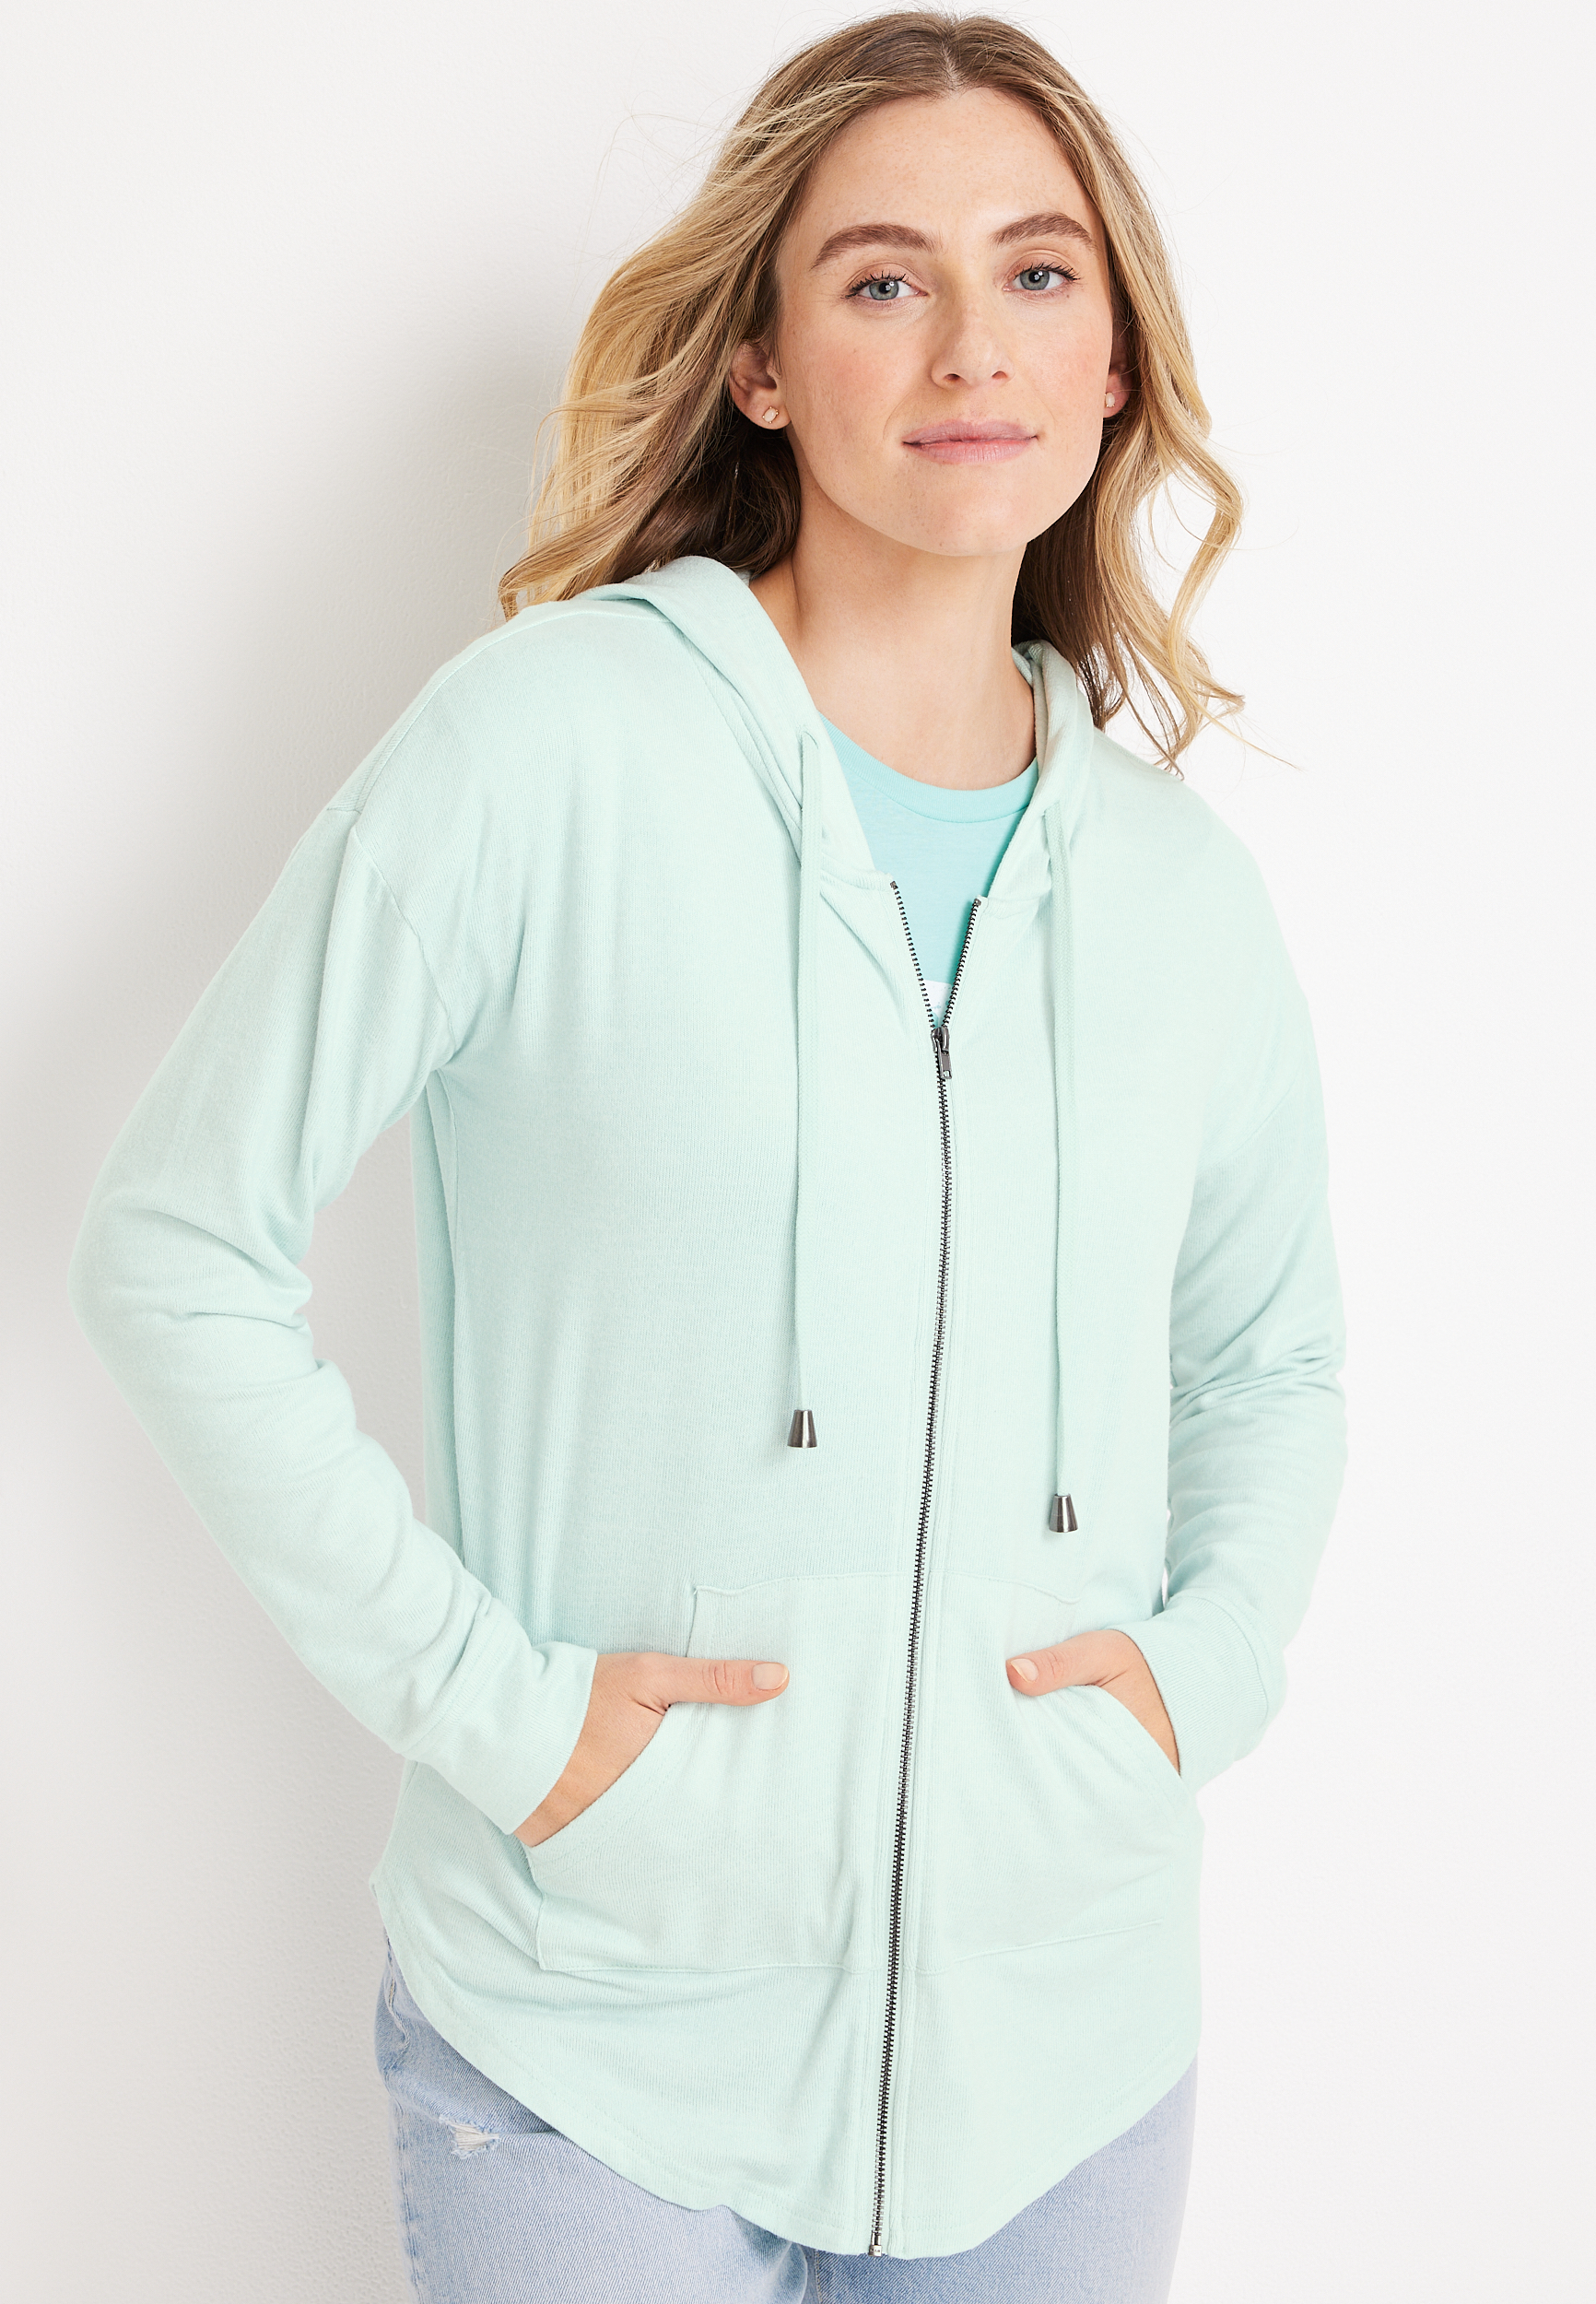 Vader fage Rendezvous handicap Fashion Sweatshirts & Pullover Hoodies For Women | maurices